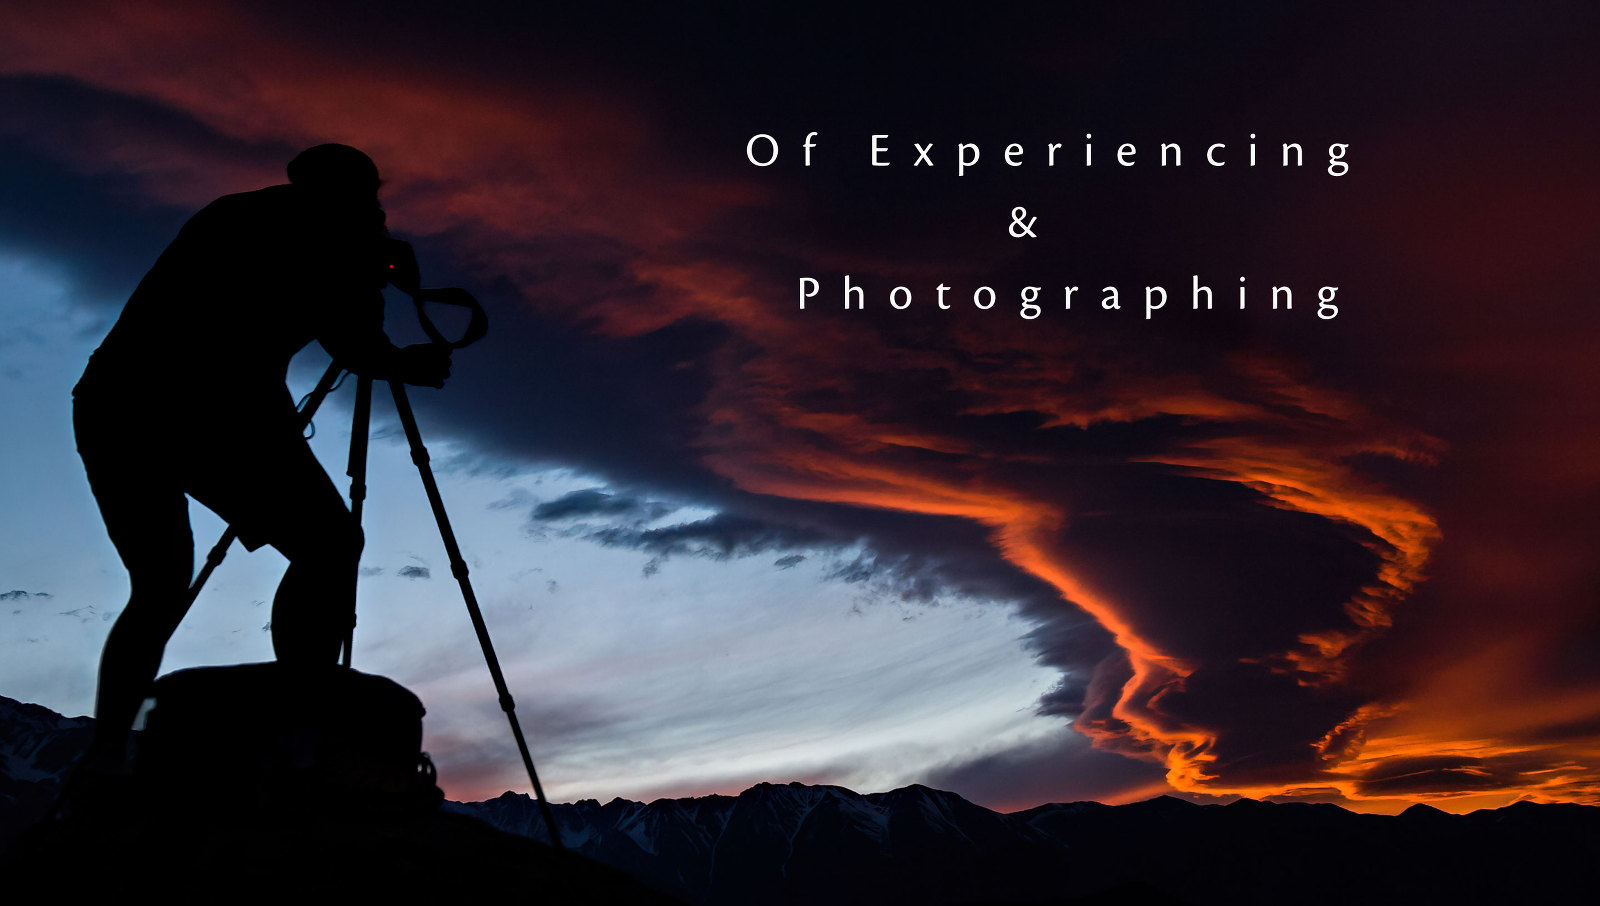 Photographer, camera, and tripod shooting sunset over mountains.